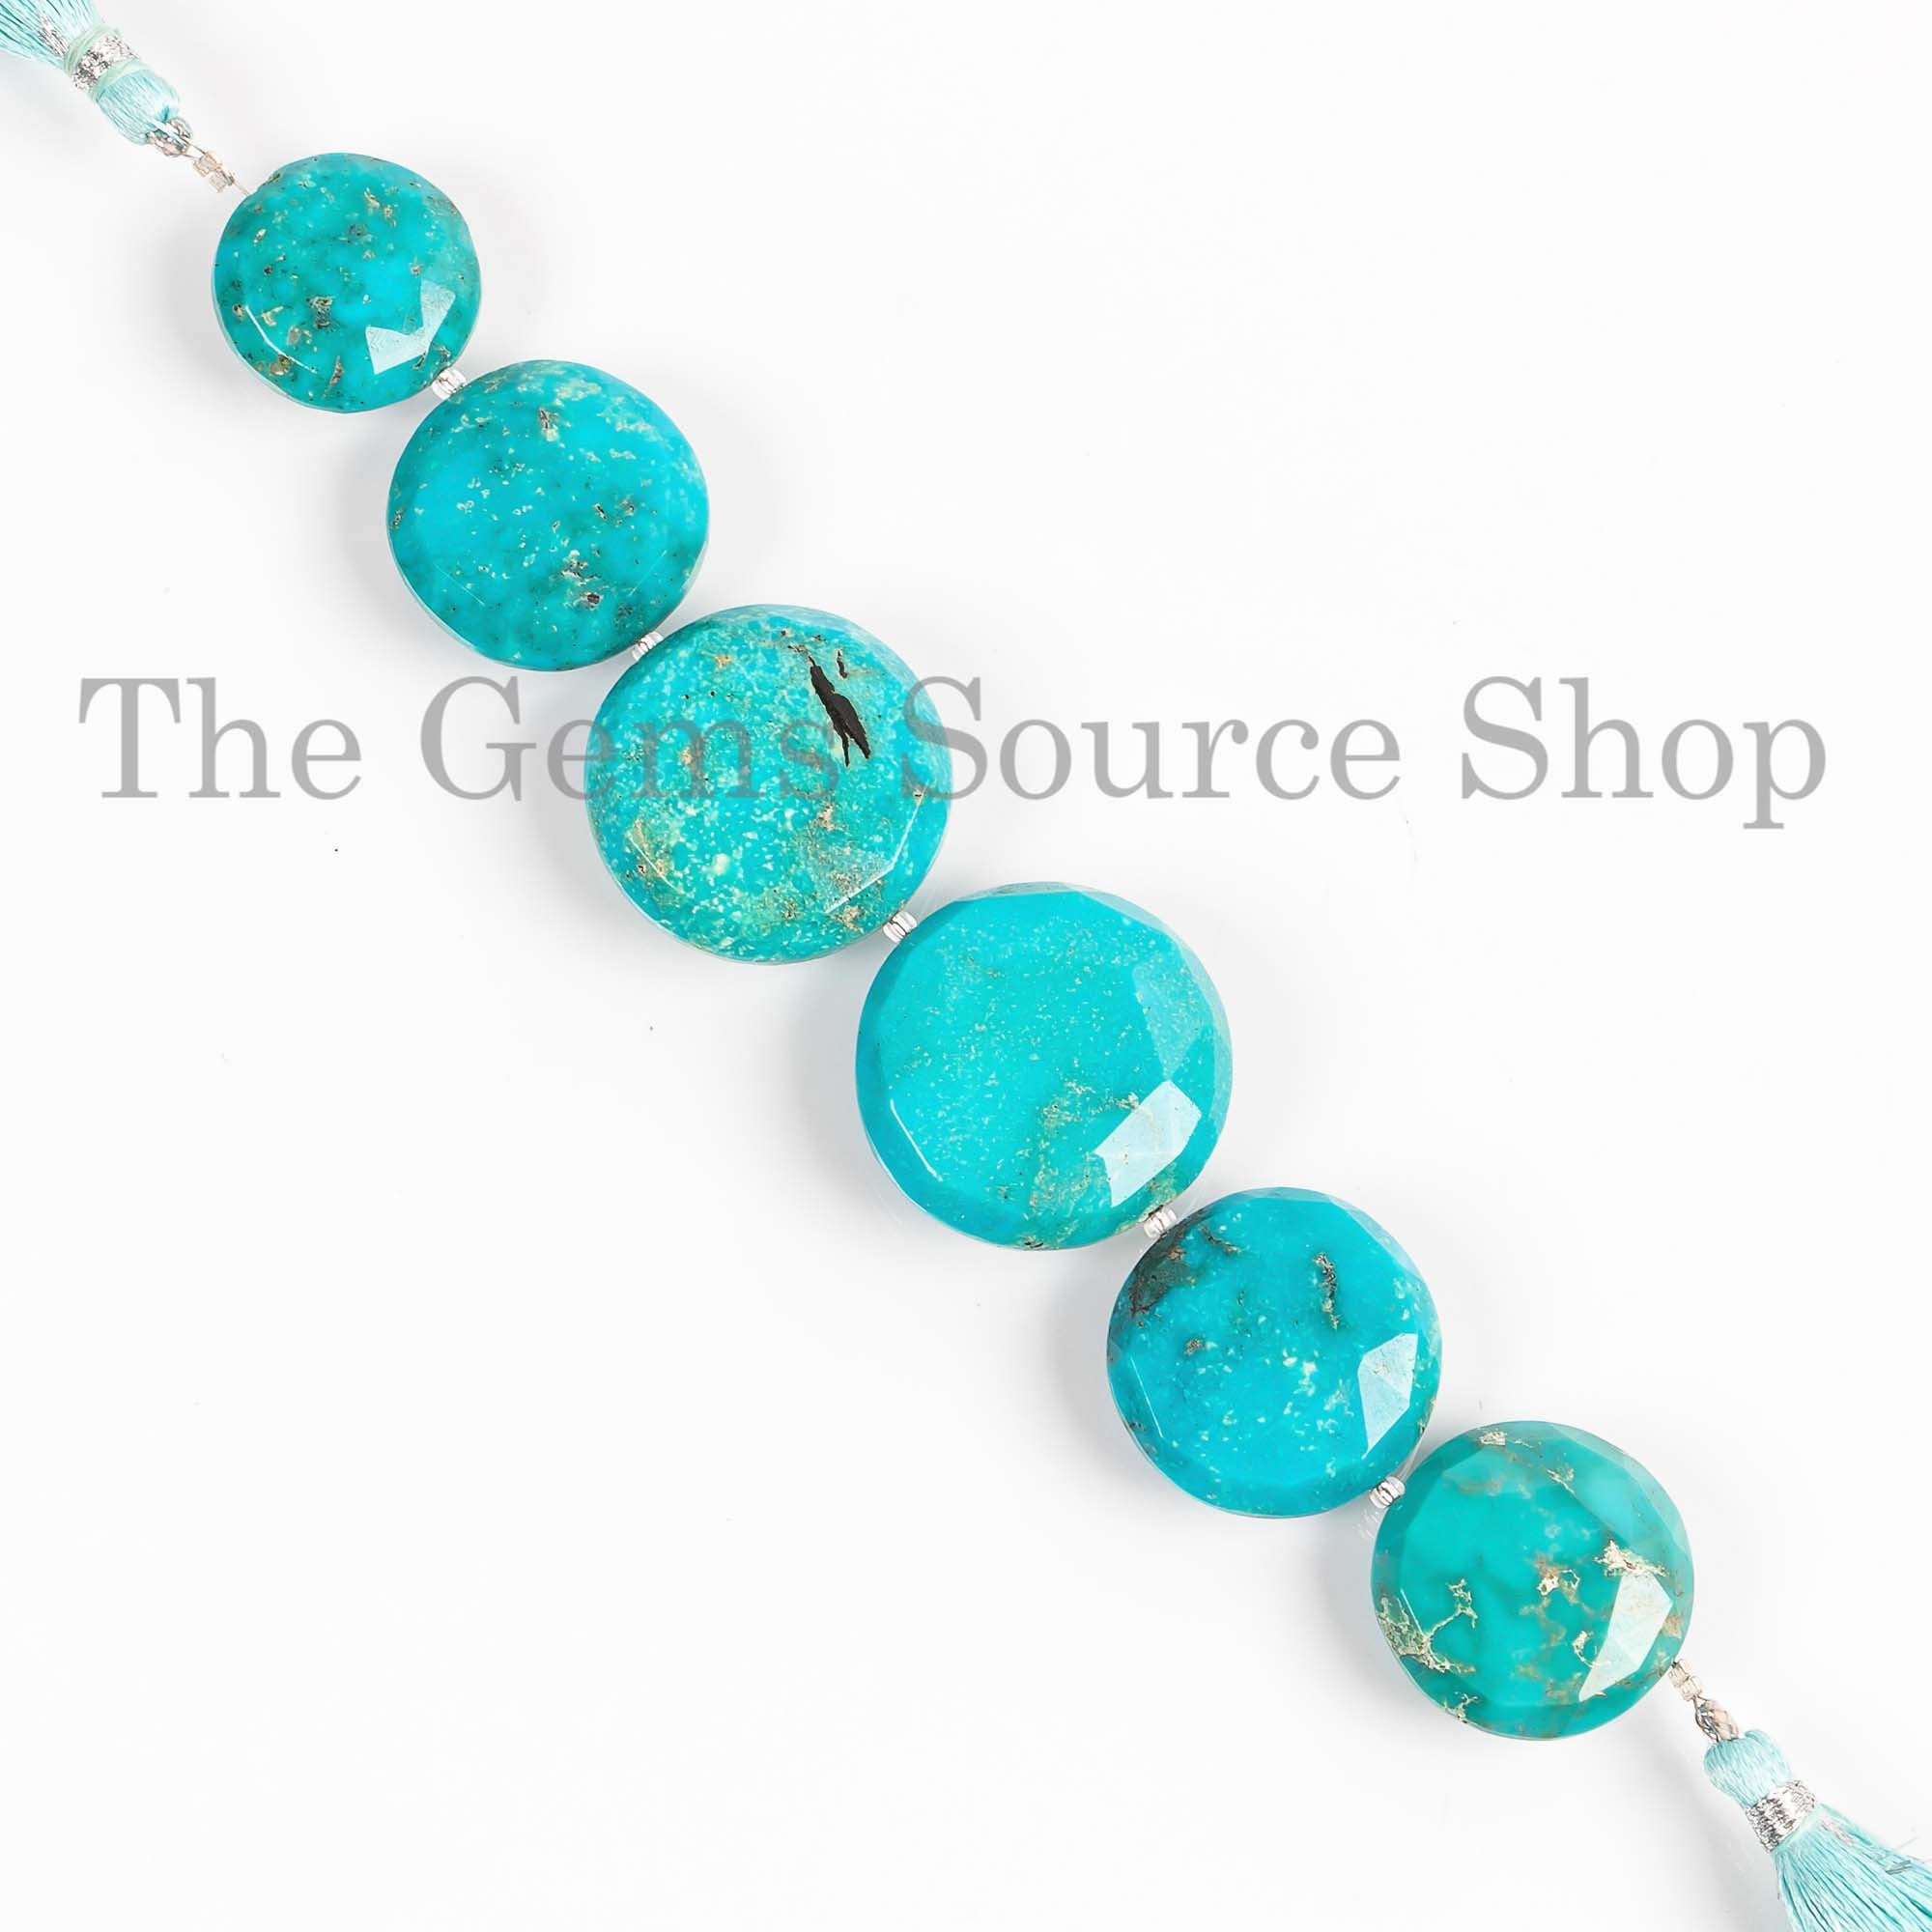 19-25mm Arizona Turquoise Coin Briolette, Turquoise Round Coin Beads, Turquoise Faceted Beads, Coin Beads, Beads For Jewelry